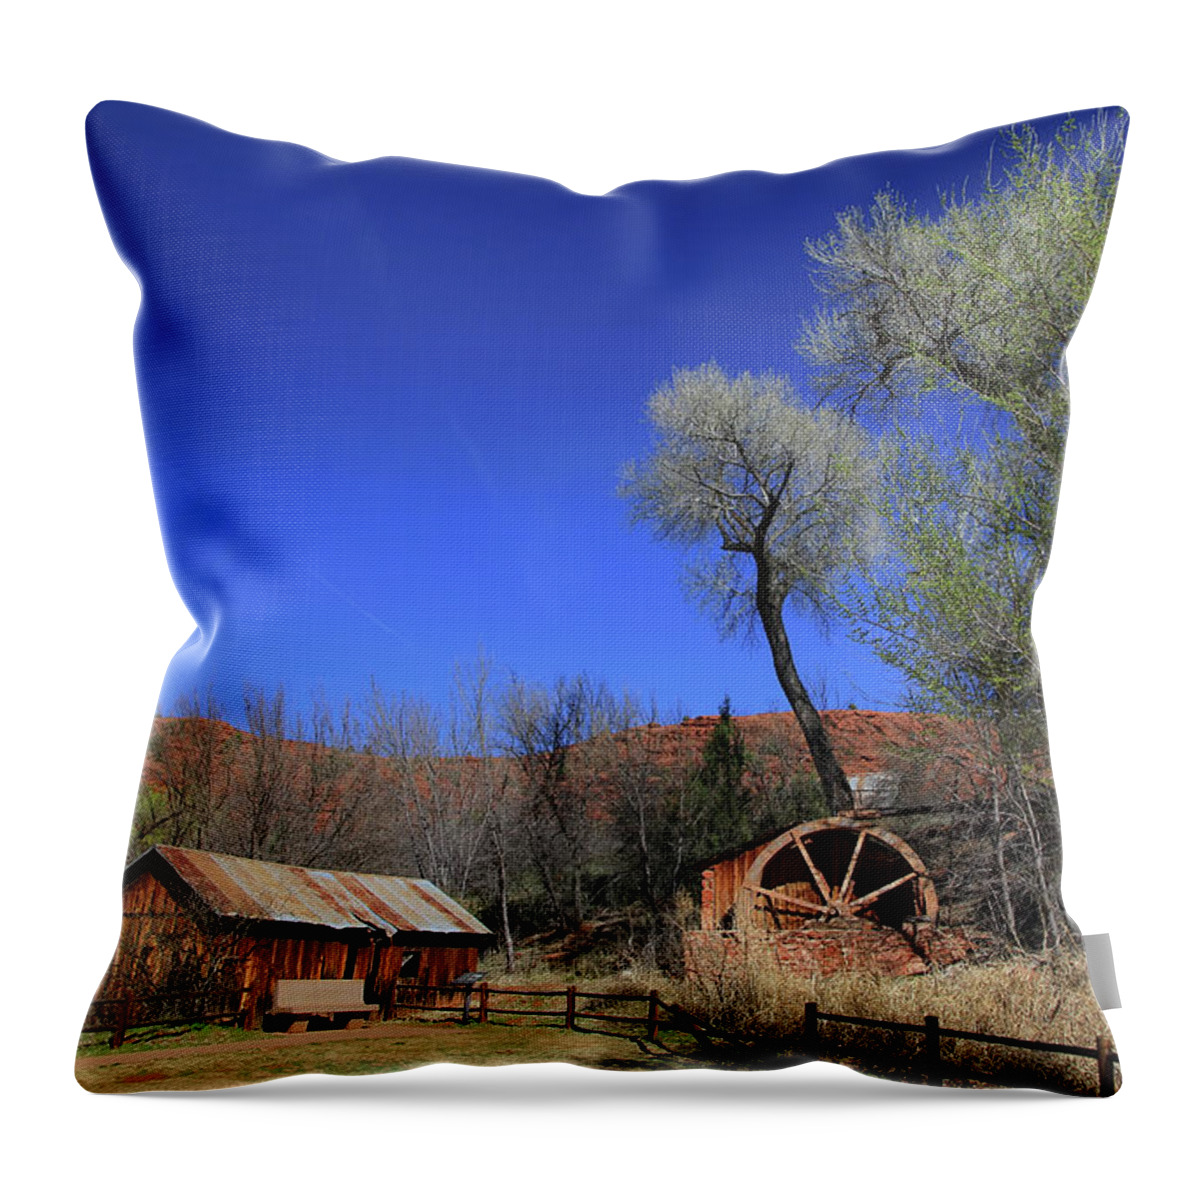 Water Wheel Throw Pillow featuring the photograph Water Wheel and Old Barn by Teresa Zieba